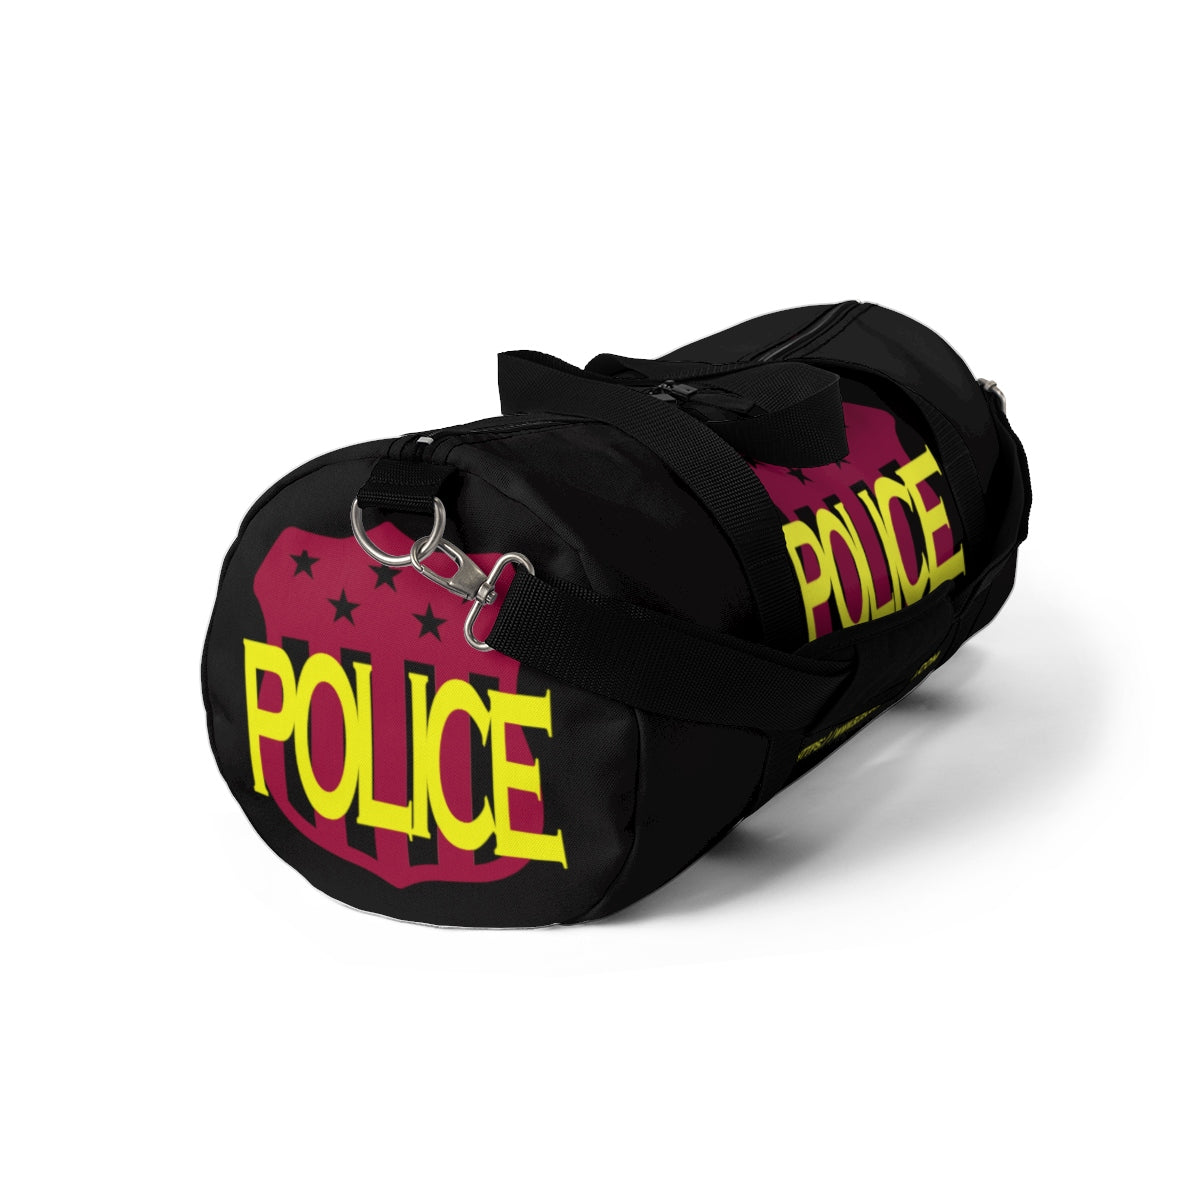 Perfect Fit Duty Bag - NatPat Ltd - Canadian Police Supplies